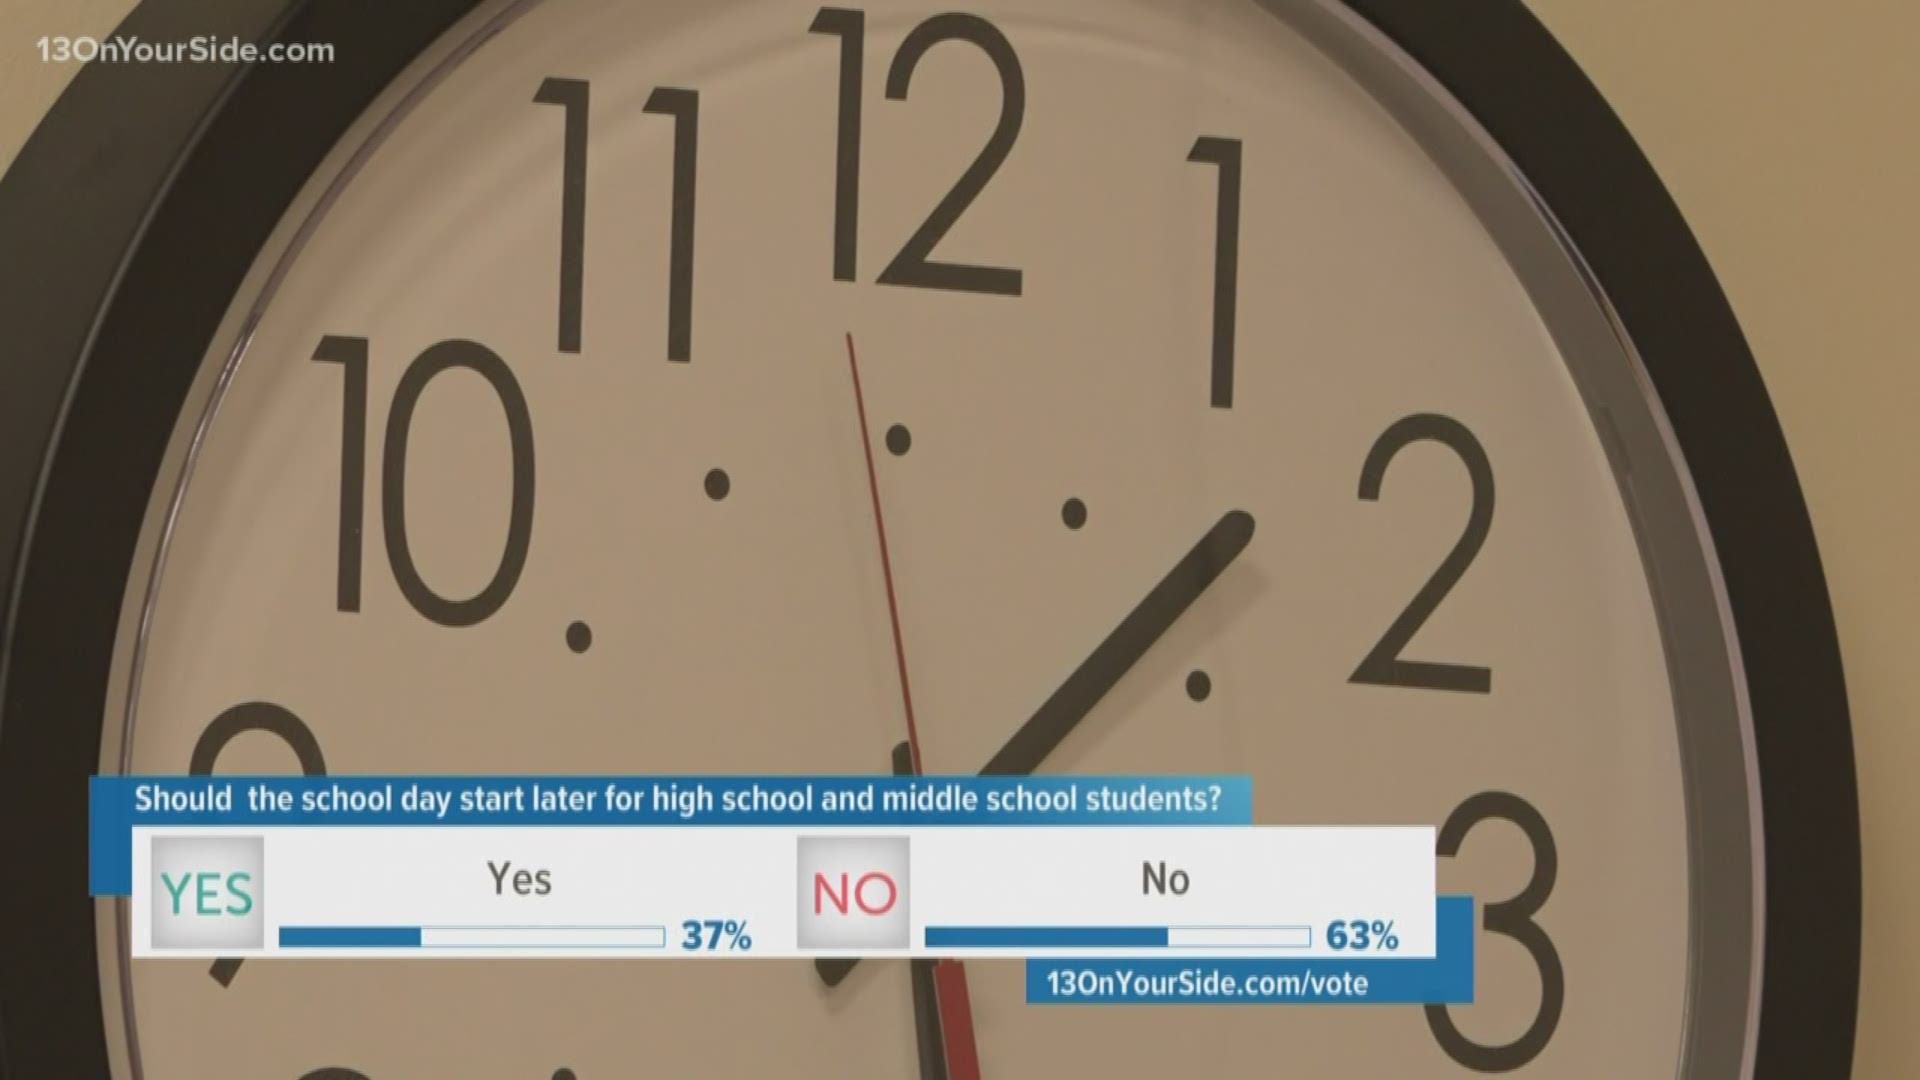 A new law in California has pushed back start times for high school and middle school students.